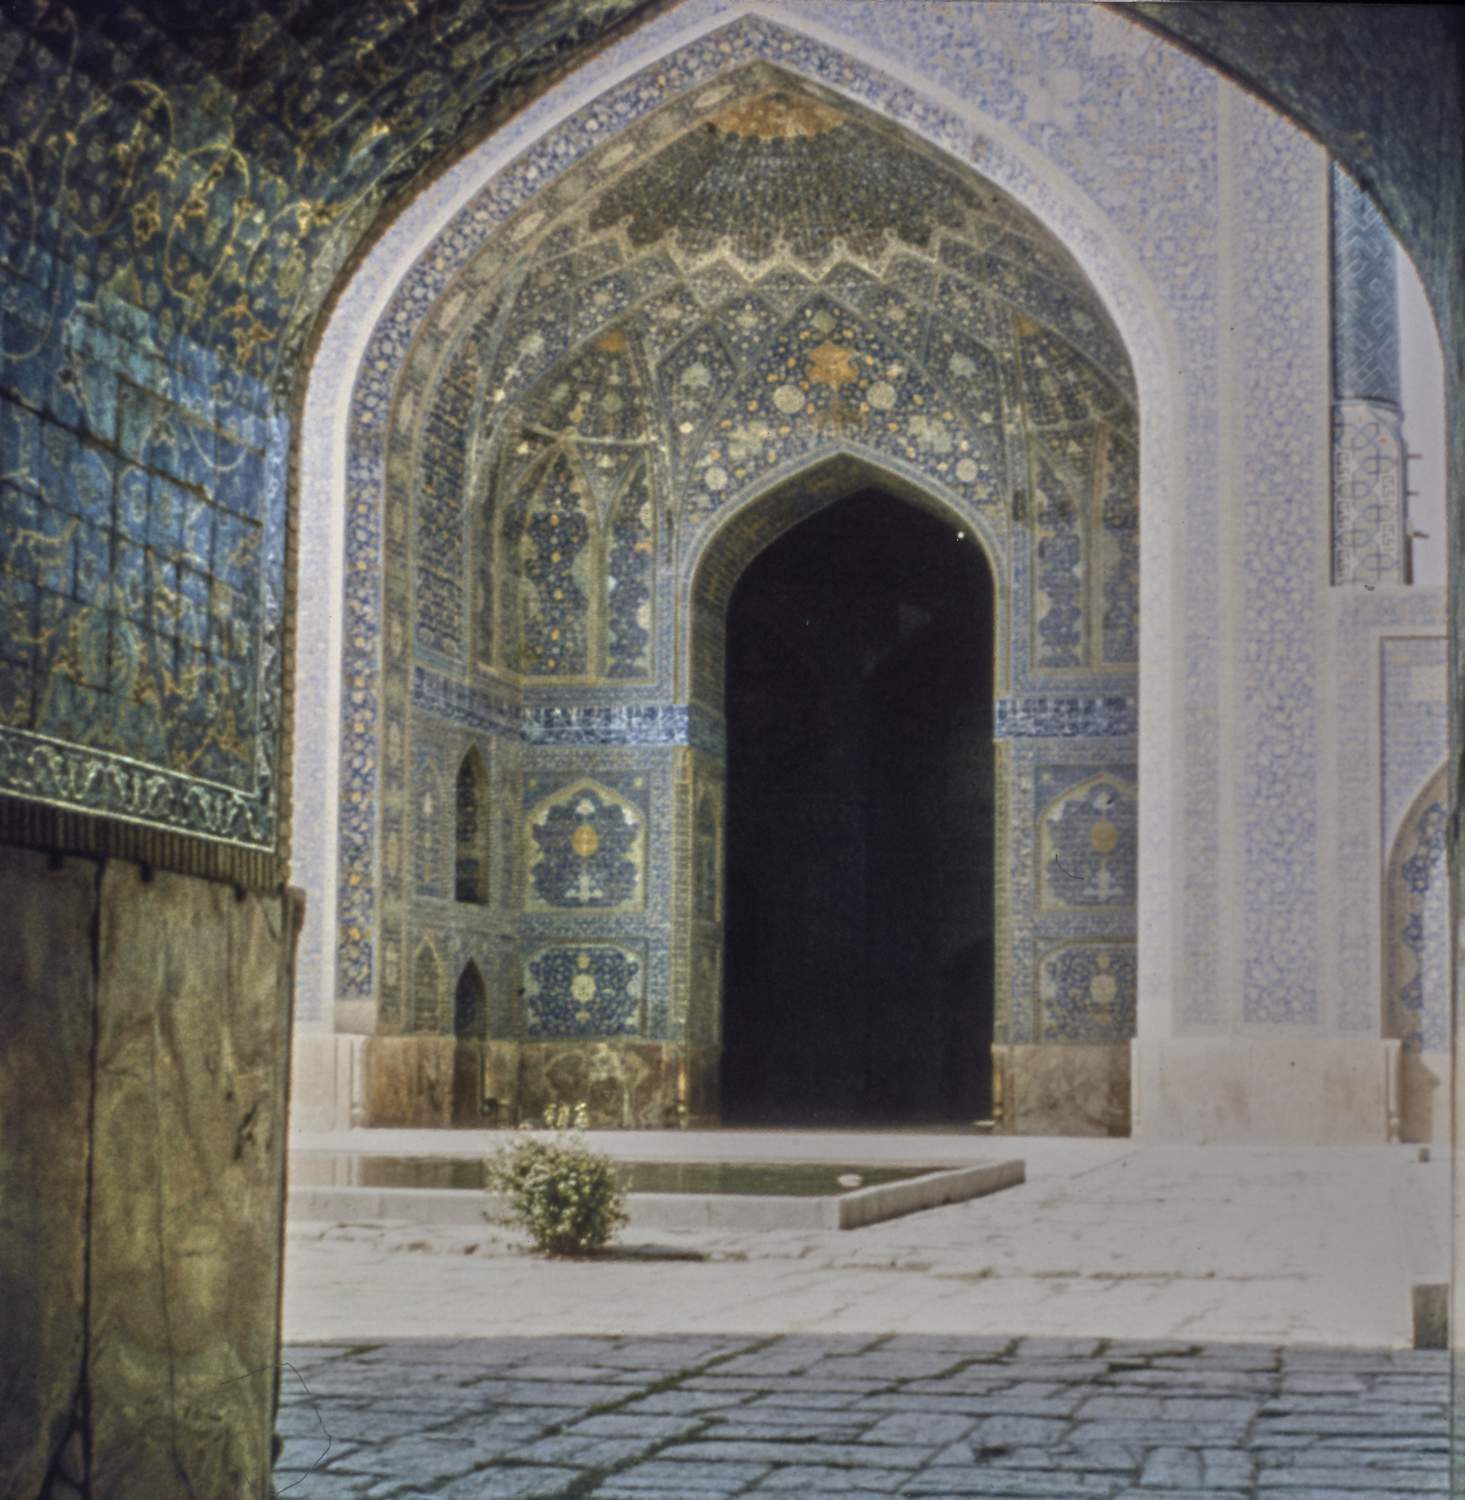 View of entrance to qibla iwan from under an arch across courtyard.